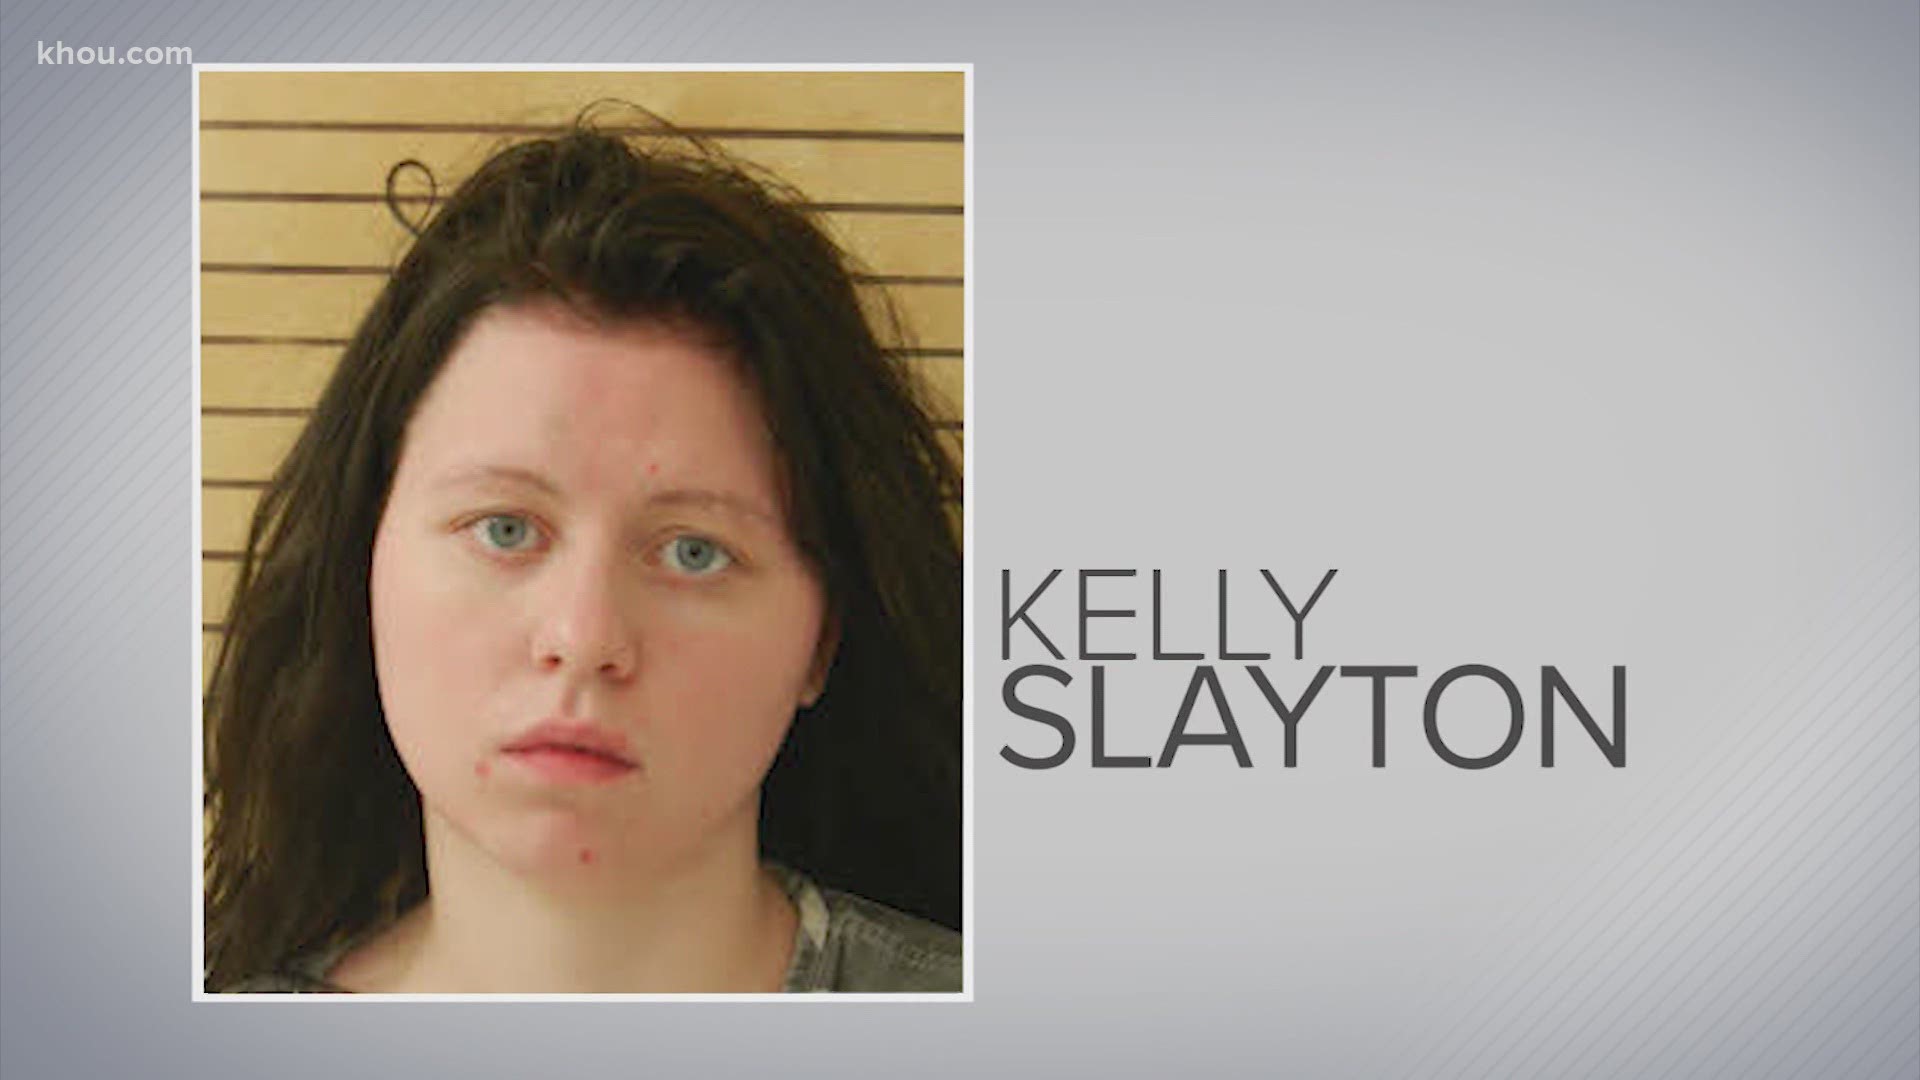 Kelly Slayton charged in death of missing Houston man khou pic